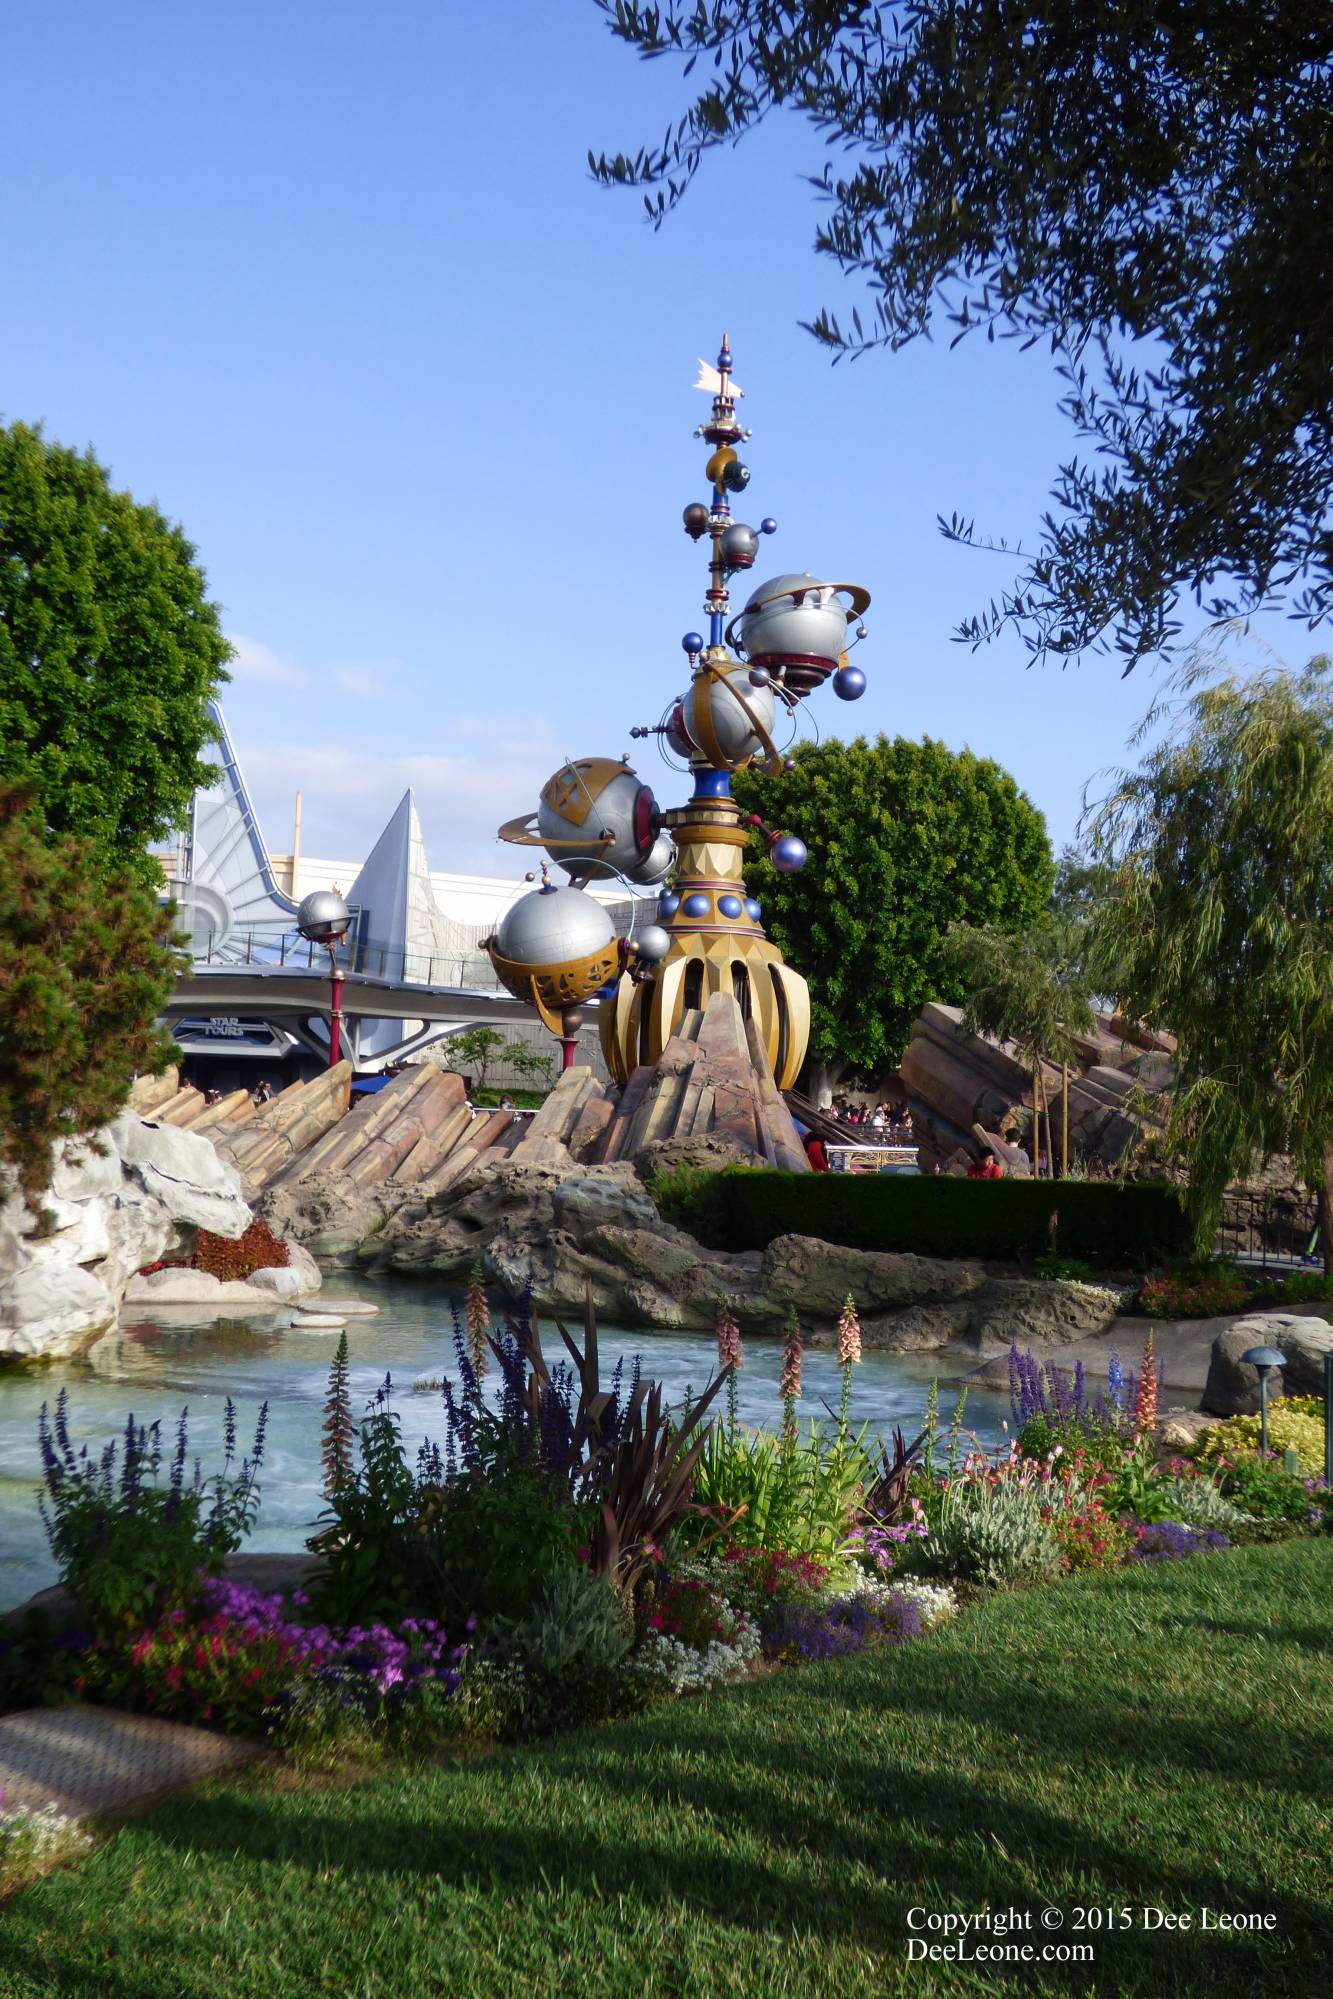 Explore the rides that make your head spin at Disneyland | PassPorter.com